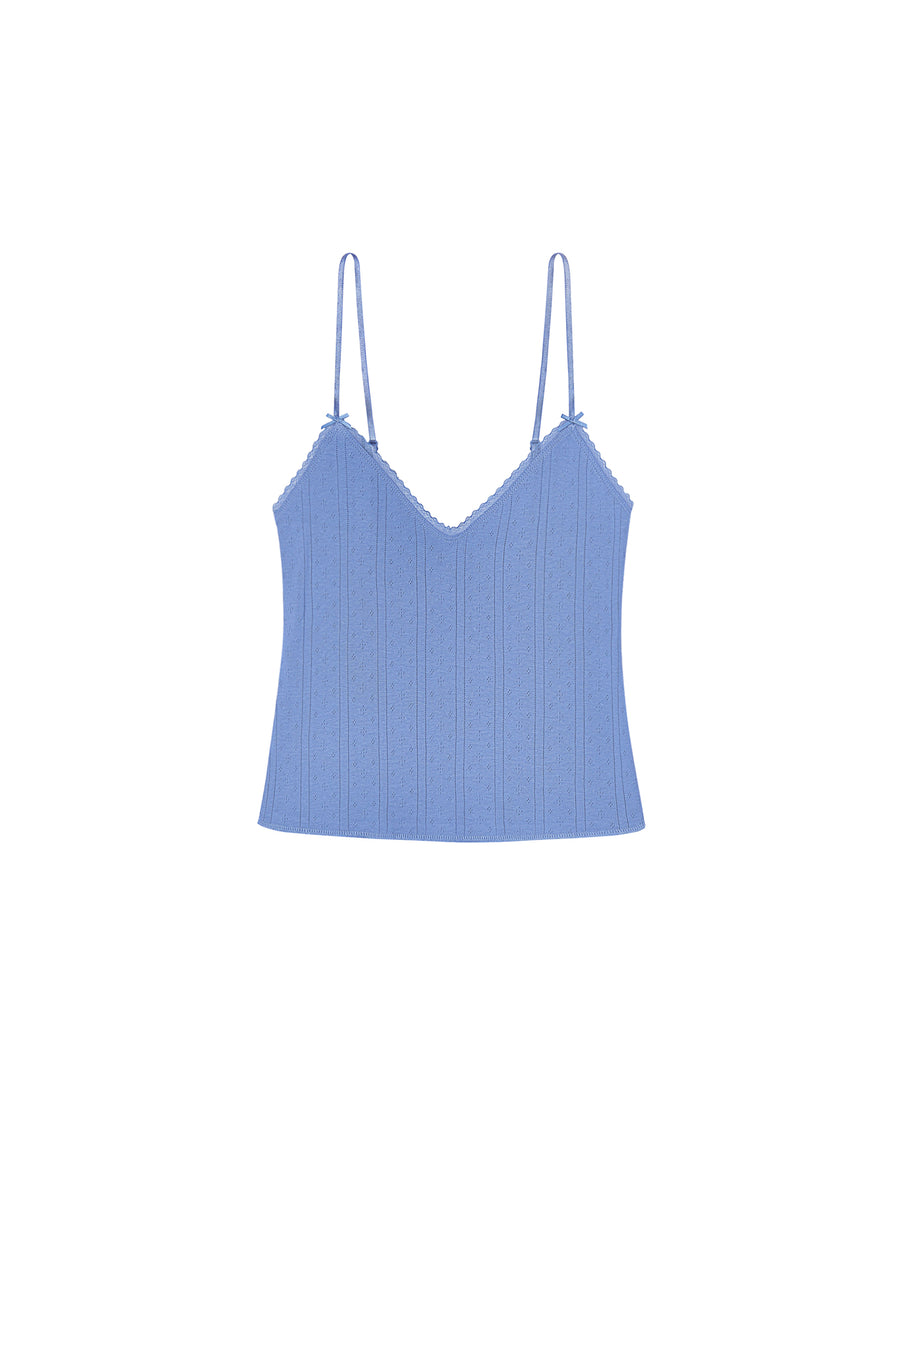 The Long Cami French Blue – Cou Cou Intimates